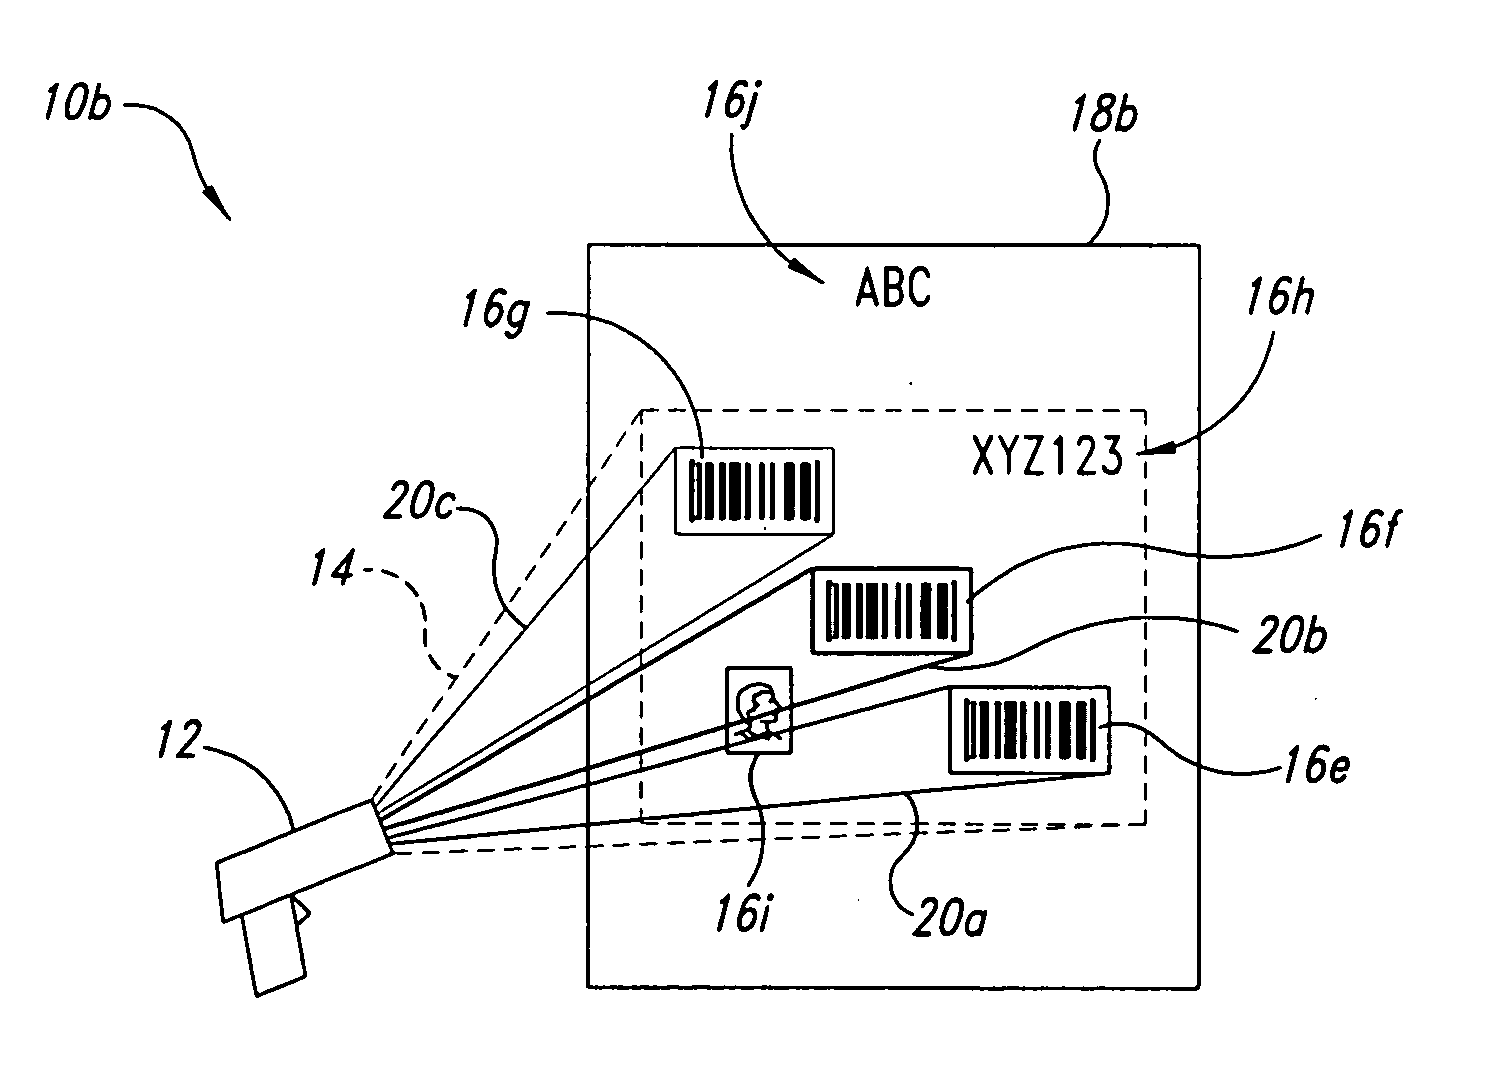 Methods, apparatuses and articles for automatic data collection devices, for example barcode readers, in cluttered environments